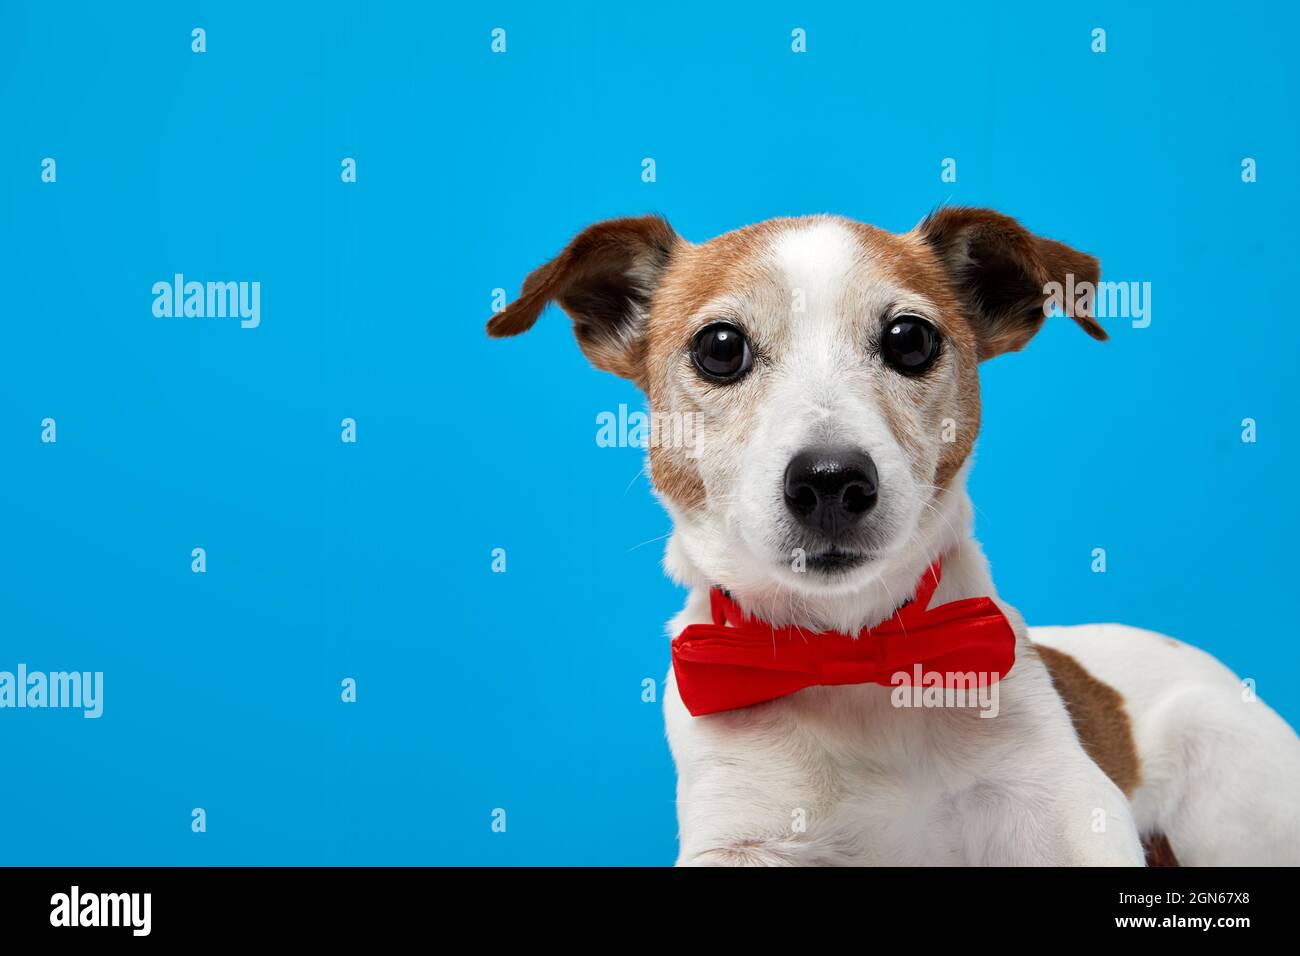 Adorable purebred Jack Russell Terrier puppy with bright red bow tie collar looking at camera against blue background with blank space Stock Photo